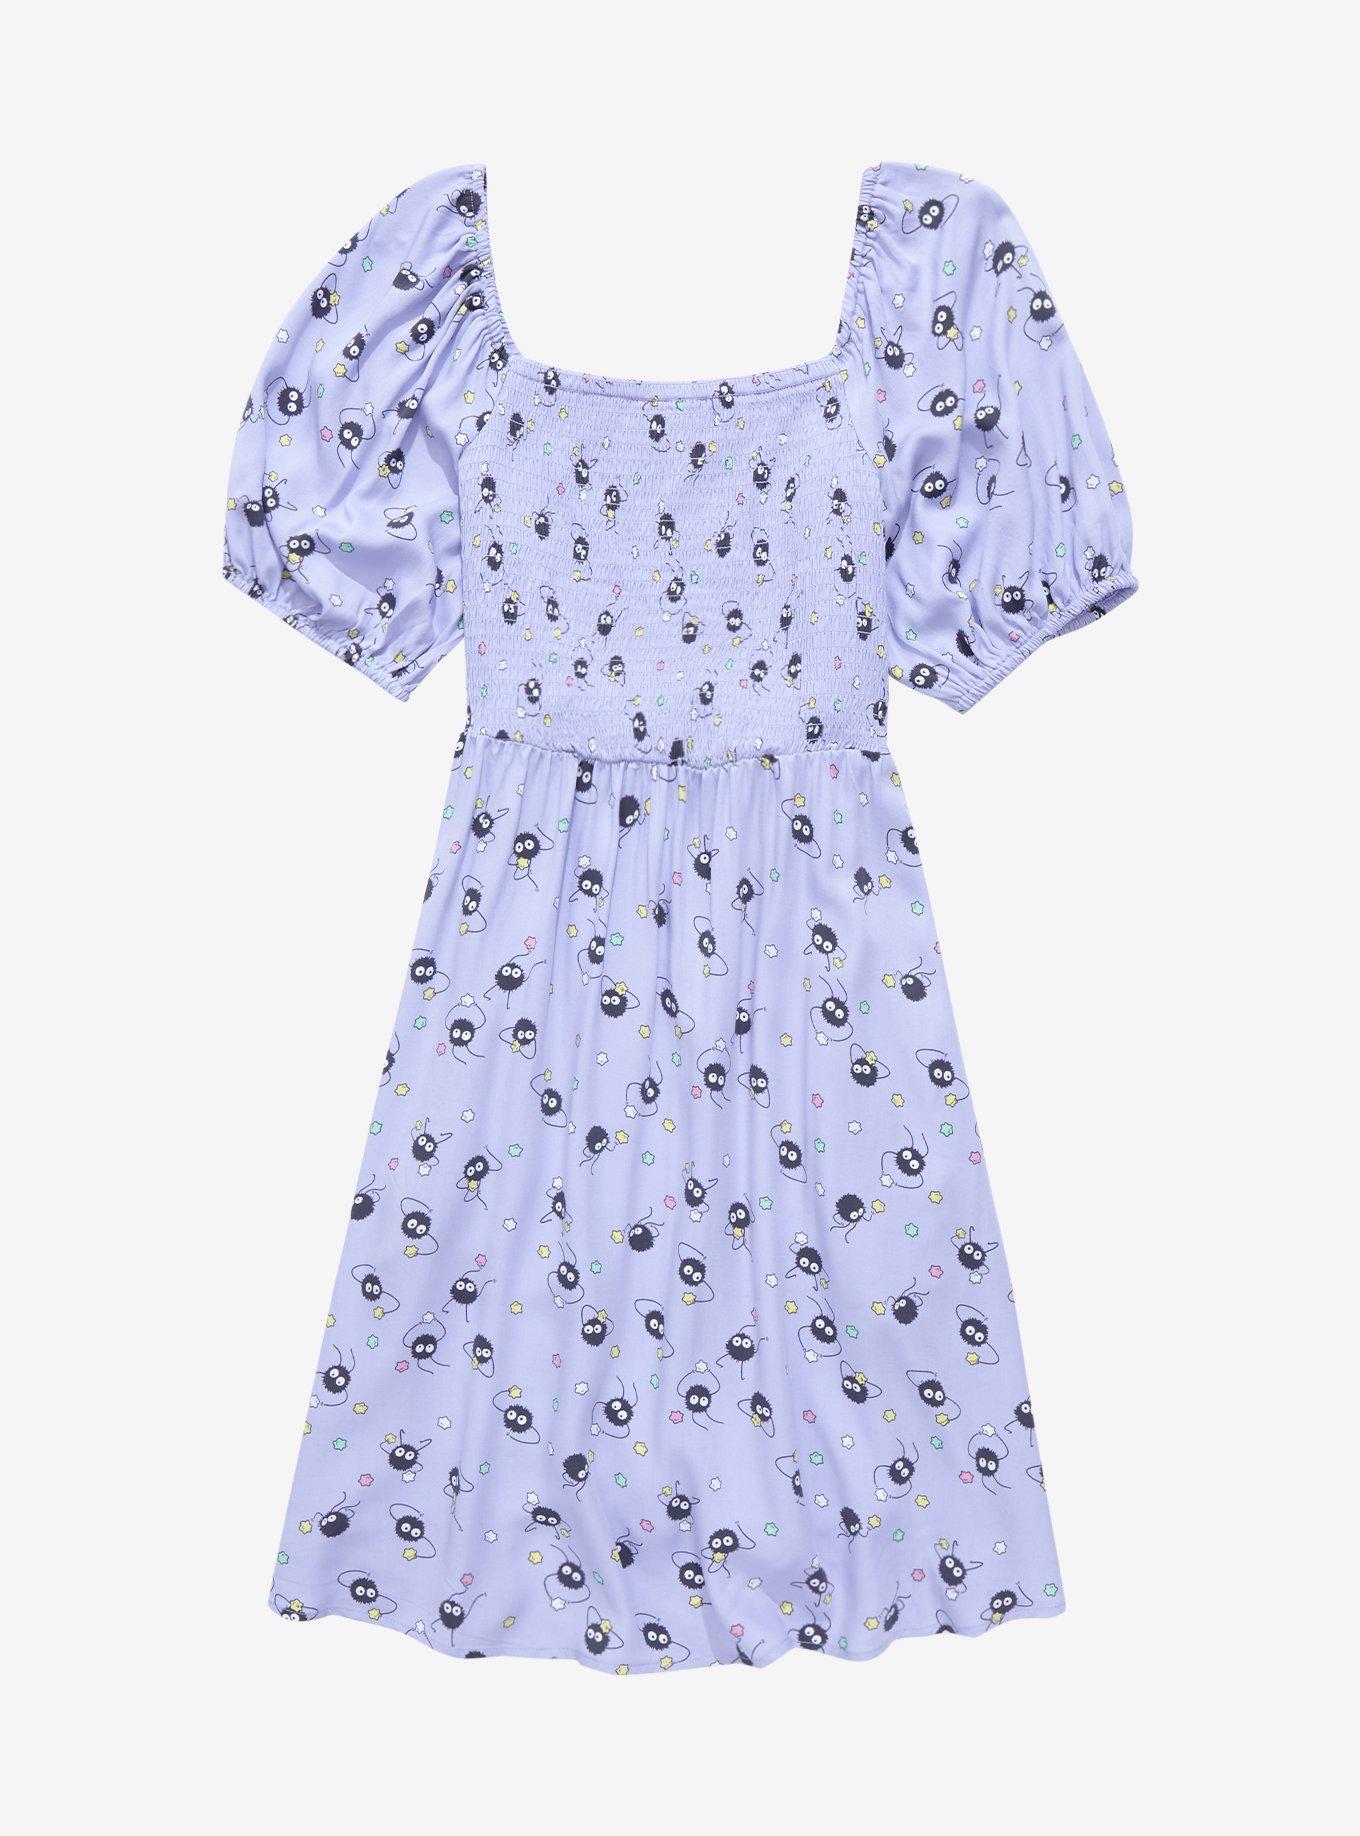 Studio Ghibli Soot Sprites Smock Dress - BoxLunch Exclusive | BoxLunch